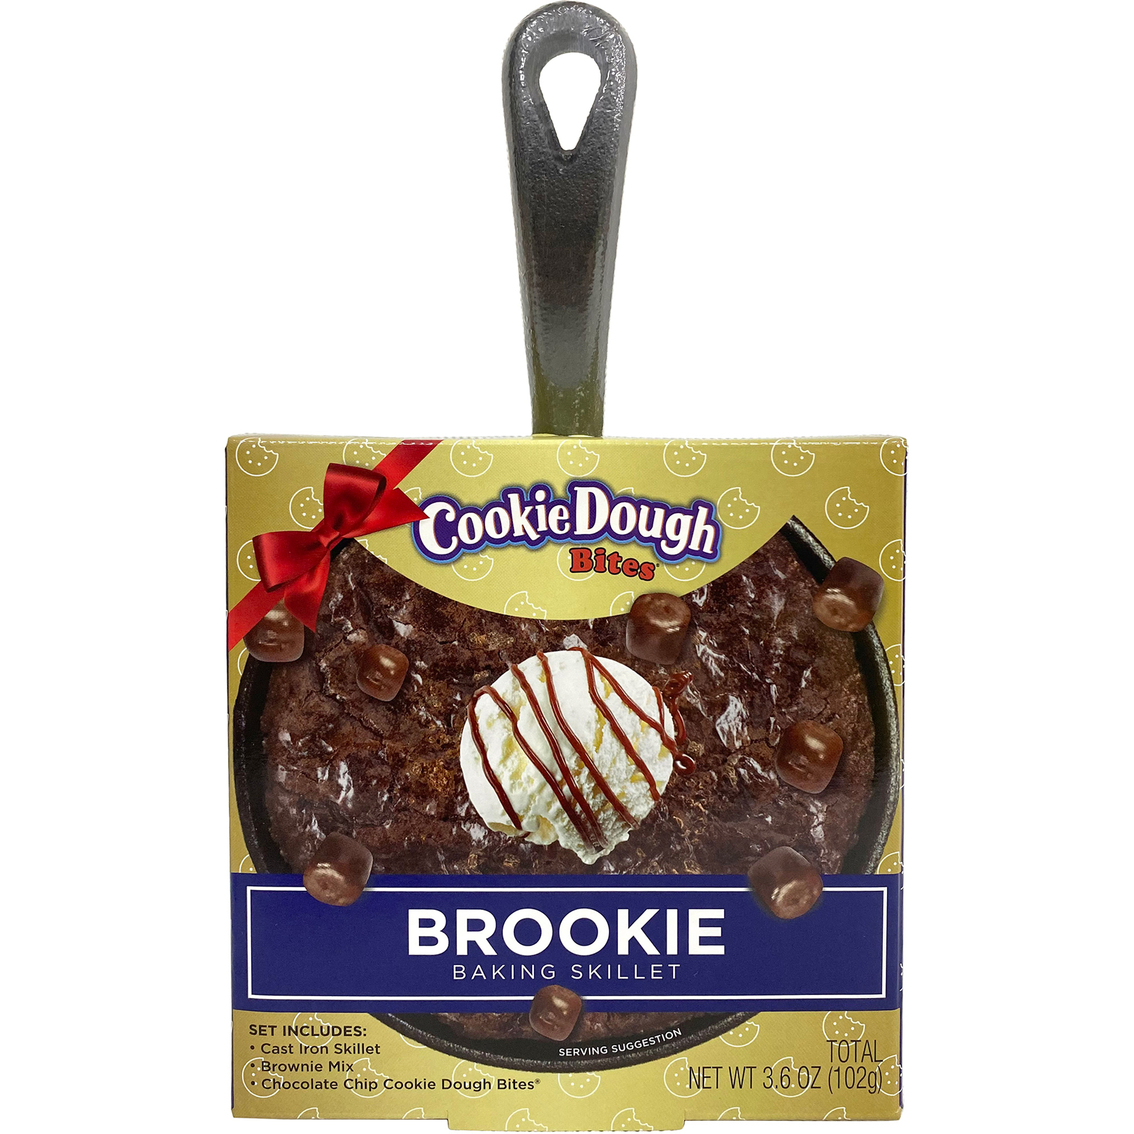 THE MODERN GOURMET - CAST IRON SKILLET BAKING KIT WITH CHOCOLATE COOKIE MIX